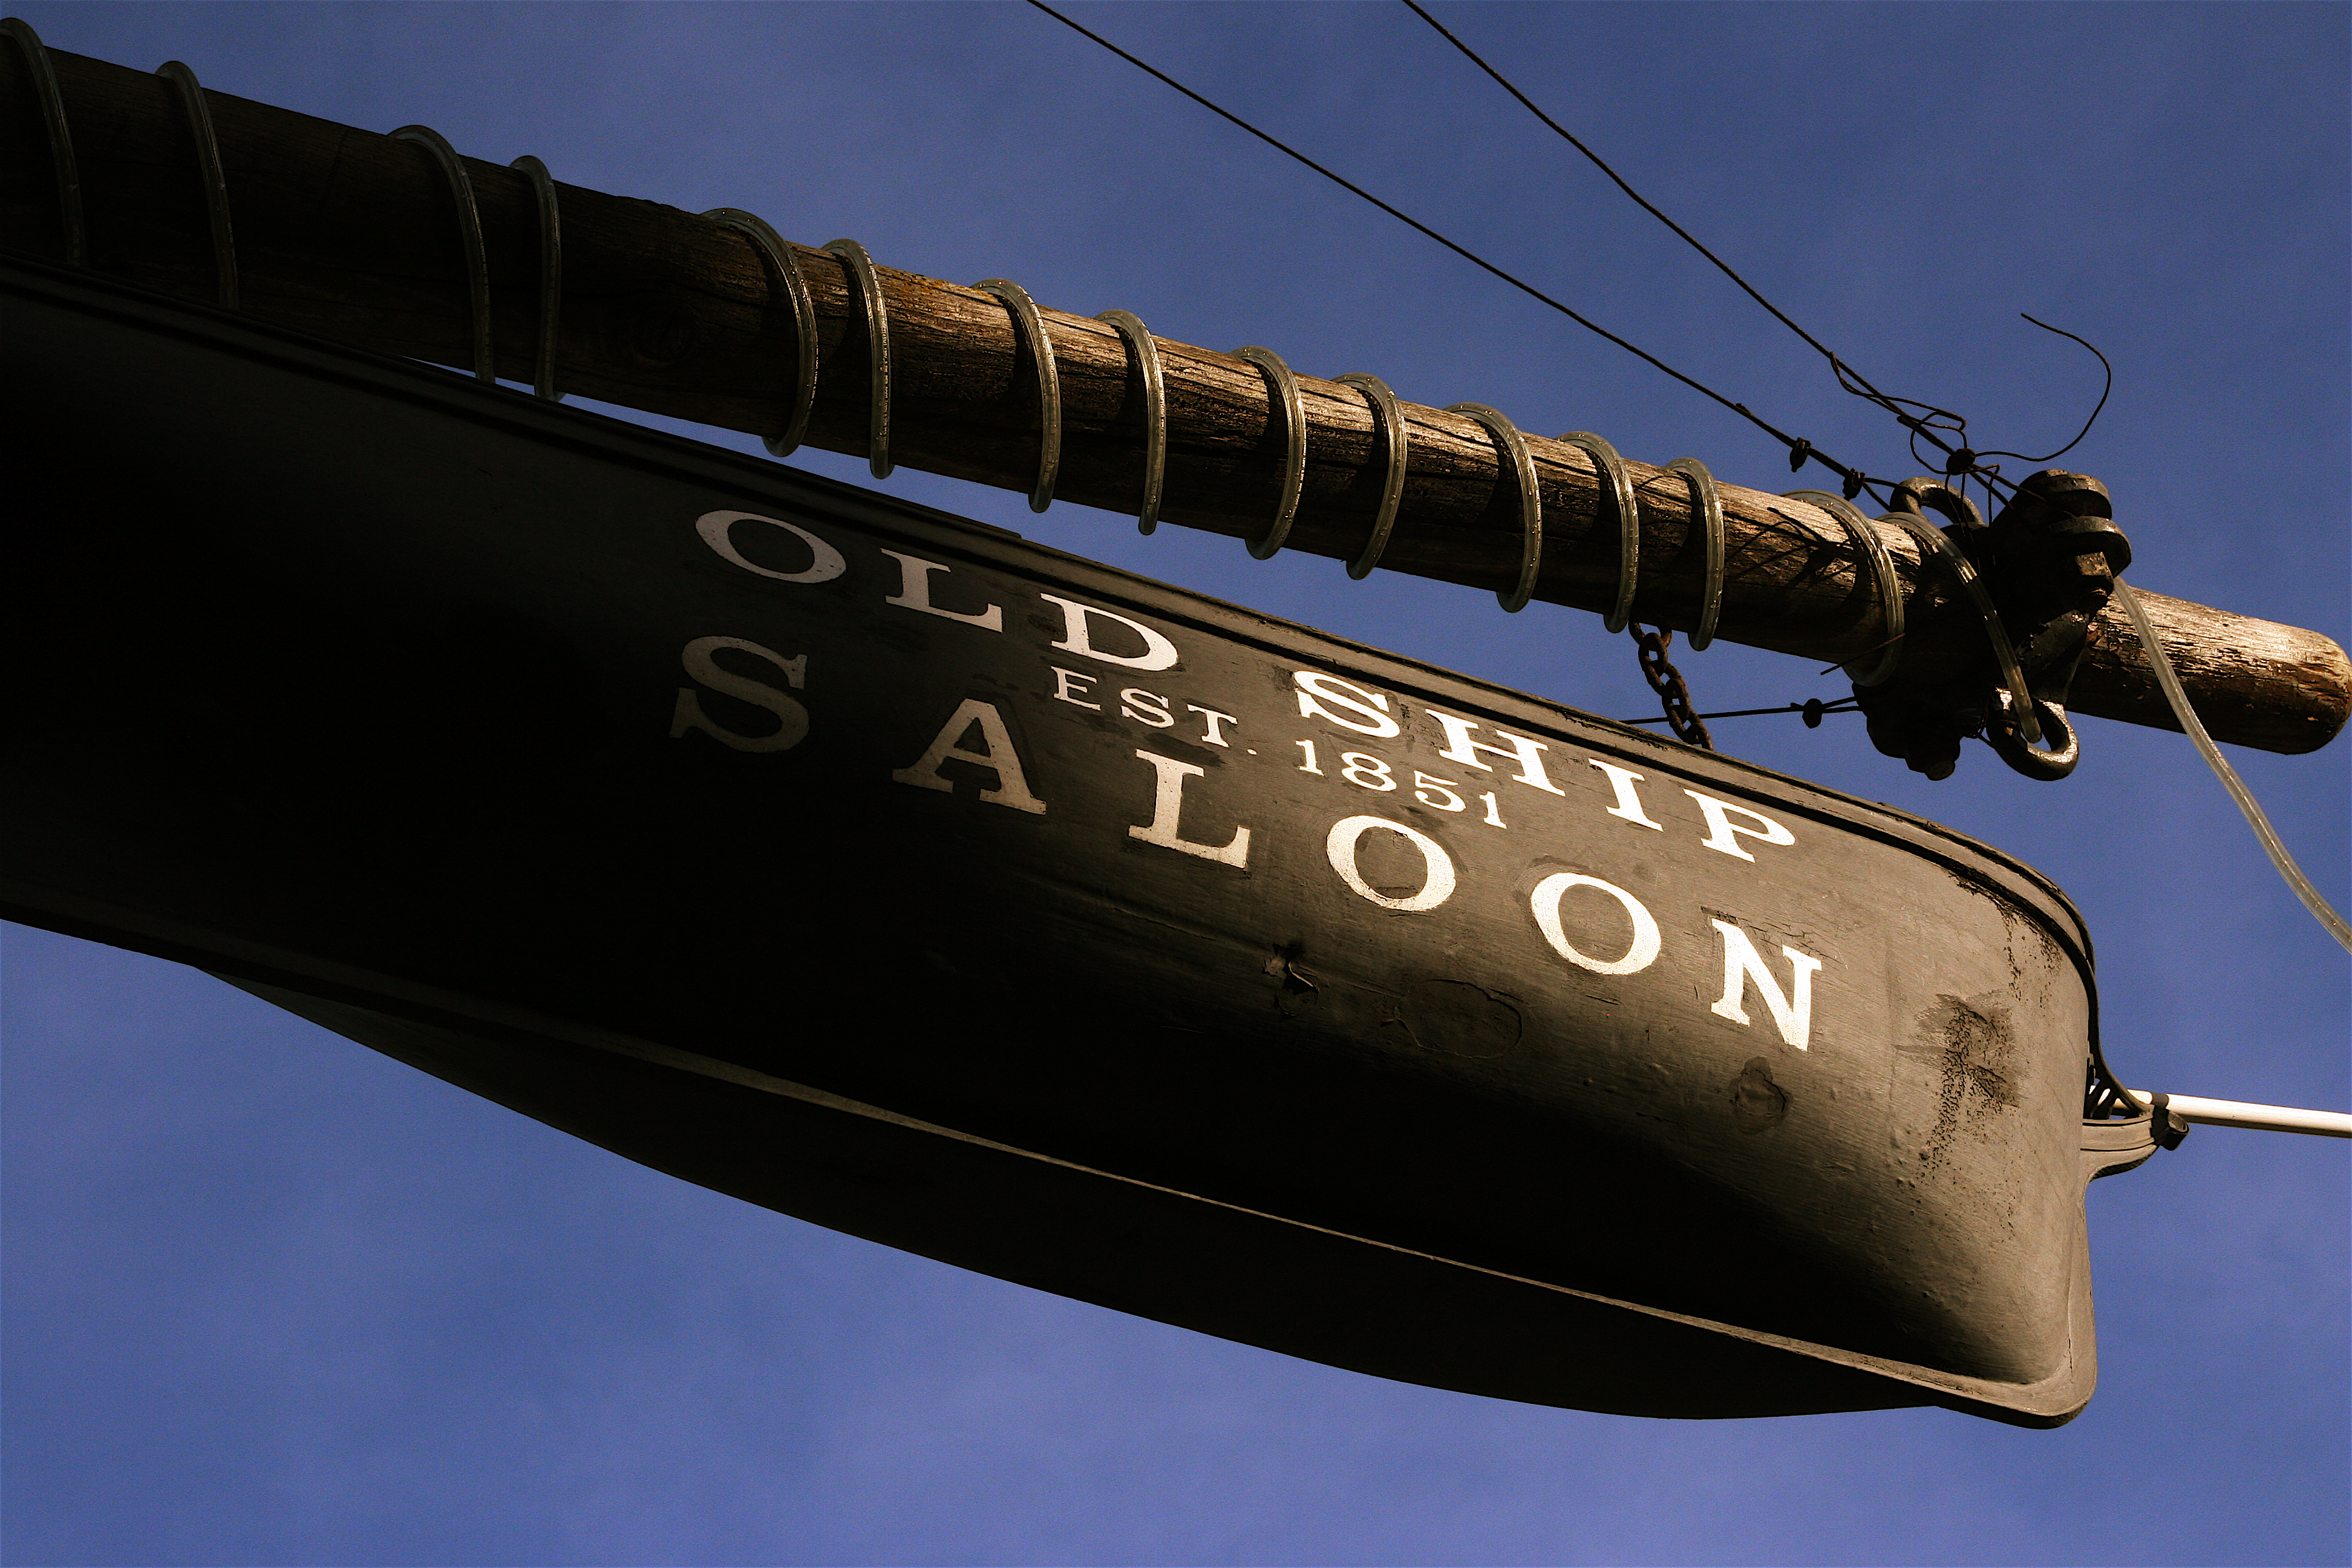 The Old Ship Saloon opened in 1851 and operated out of the hull of the Arkansas (Credit: Jennifer Woodard Madera)